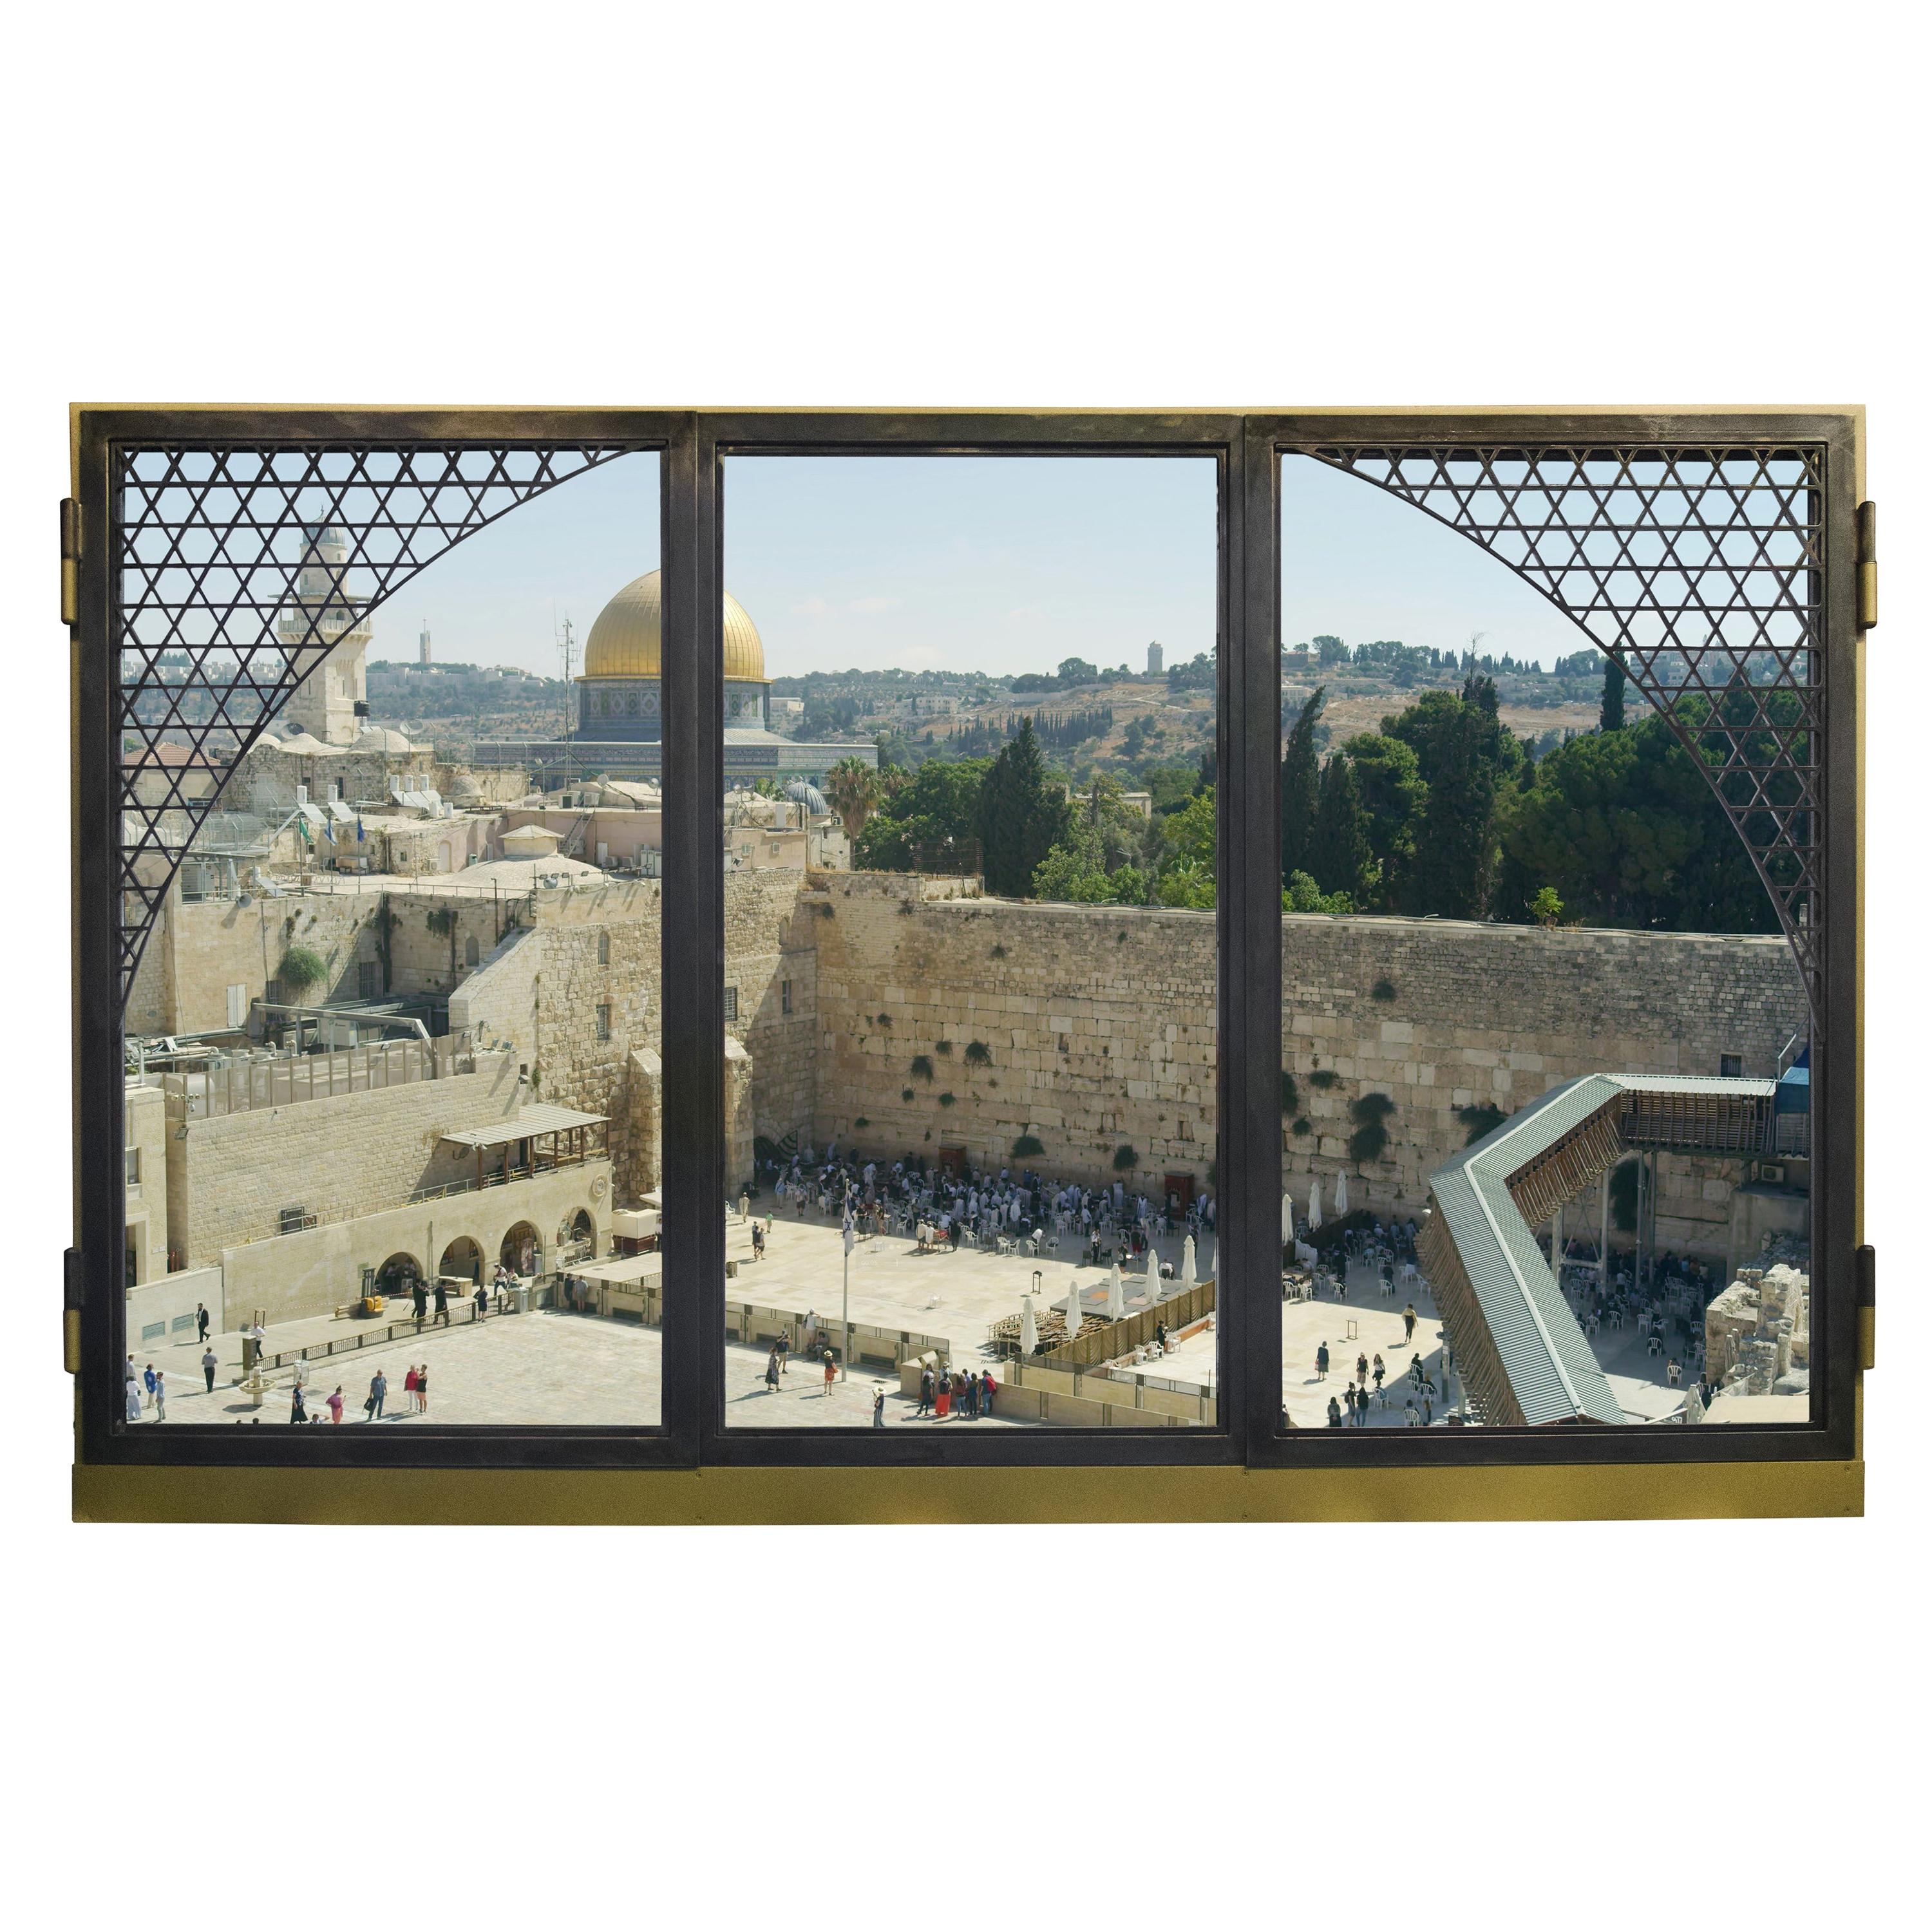 Anotherview N.18 A Sunday by the Western Wall, Video Art by Anotherview